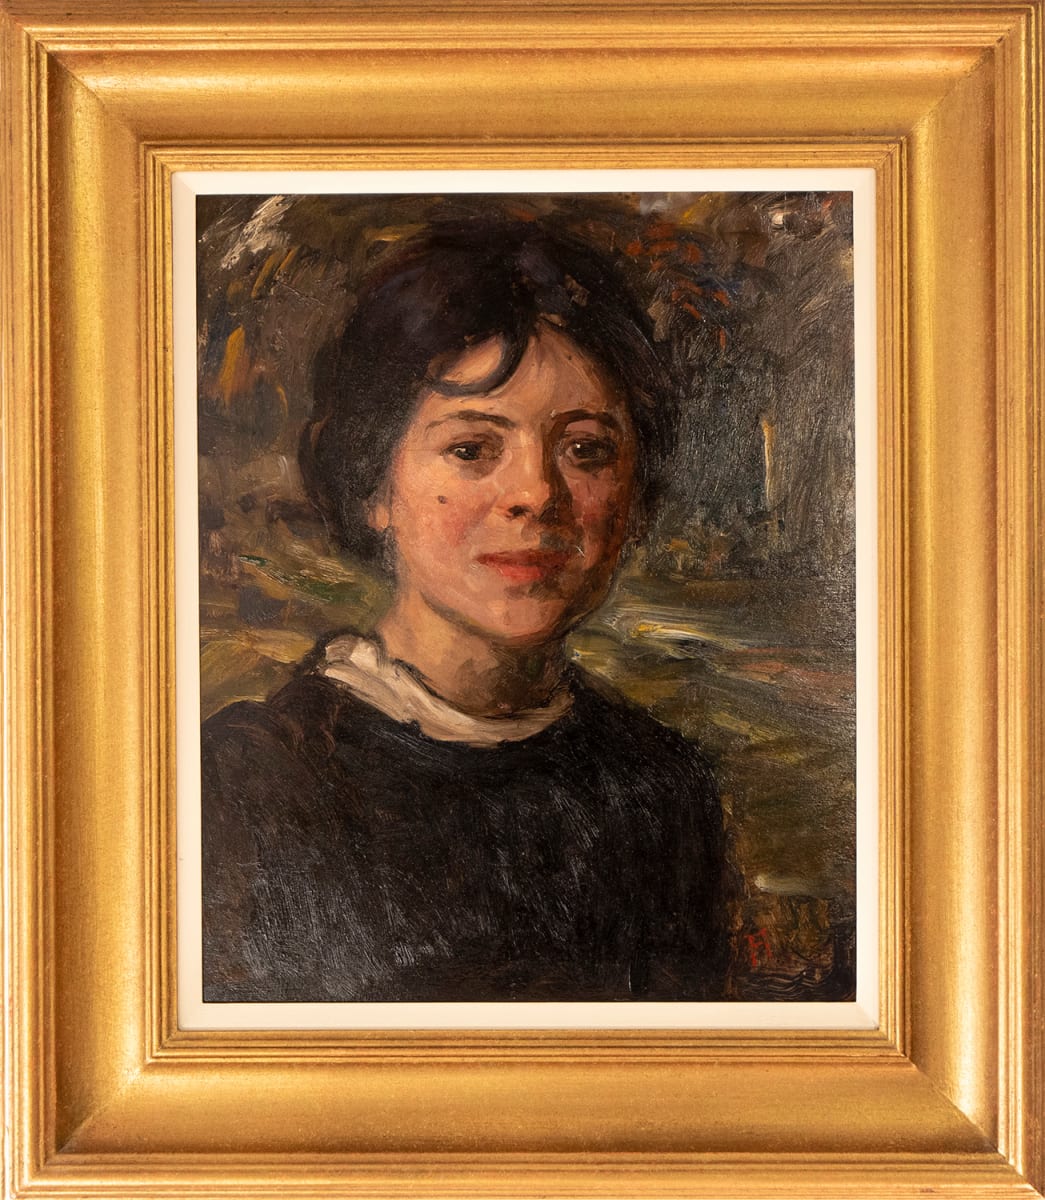 Portrait of a young woman by Frederick C. Mulock  Image: https://www.artworkarchive.com/profile/romijn-art/artwork/portrait-of-a-young-woman-the-portrait-paiting-gallery